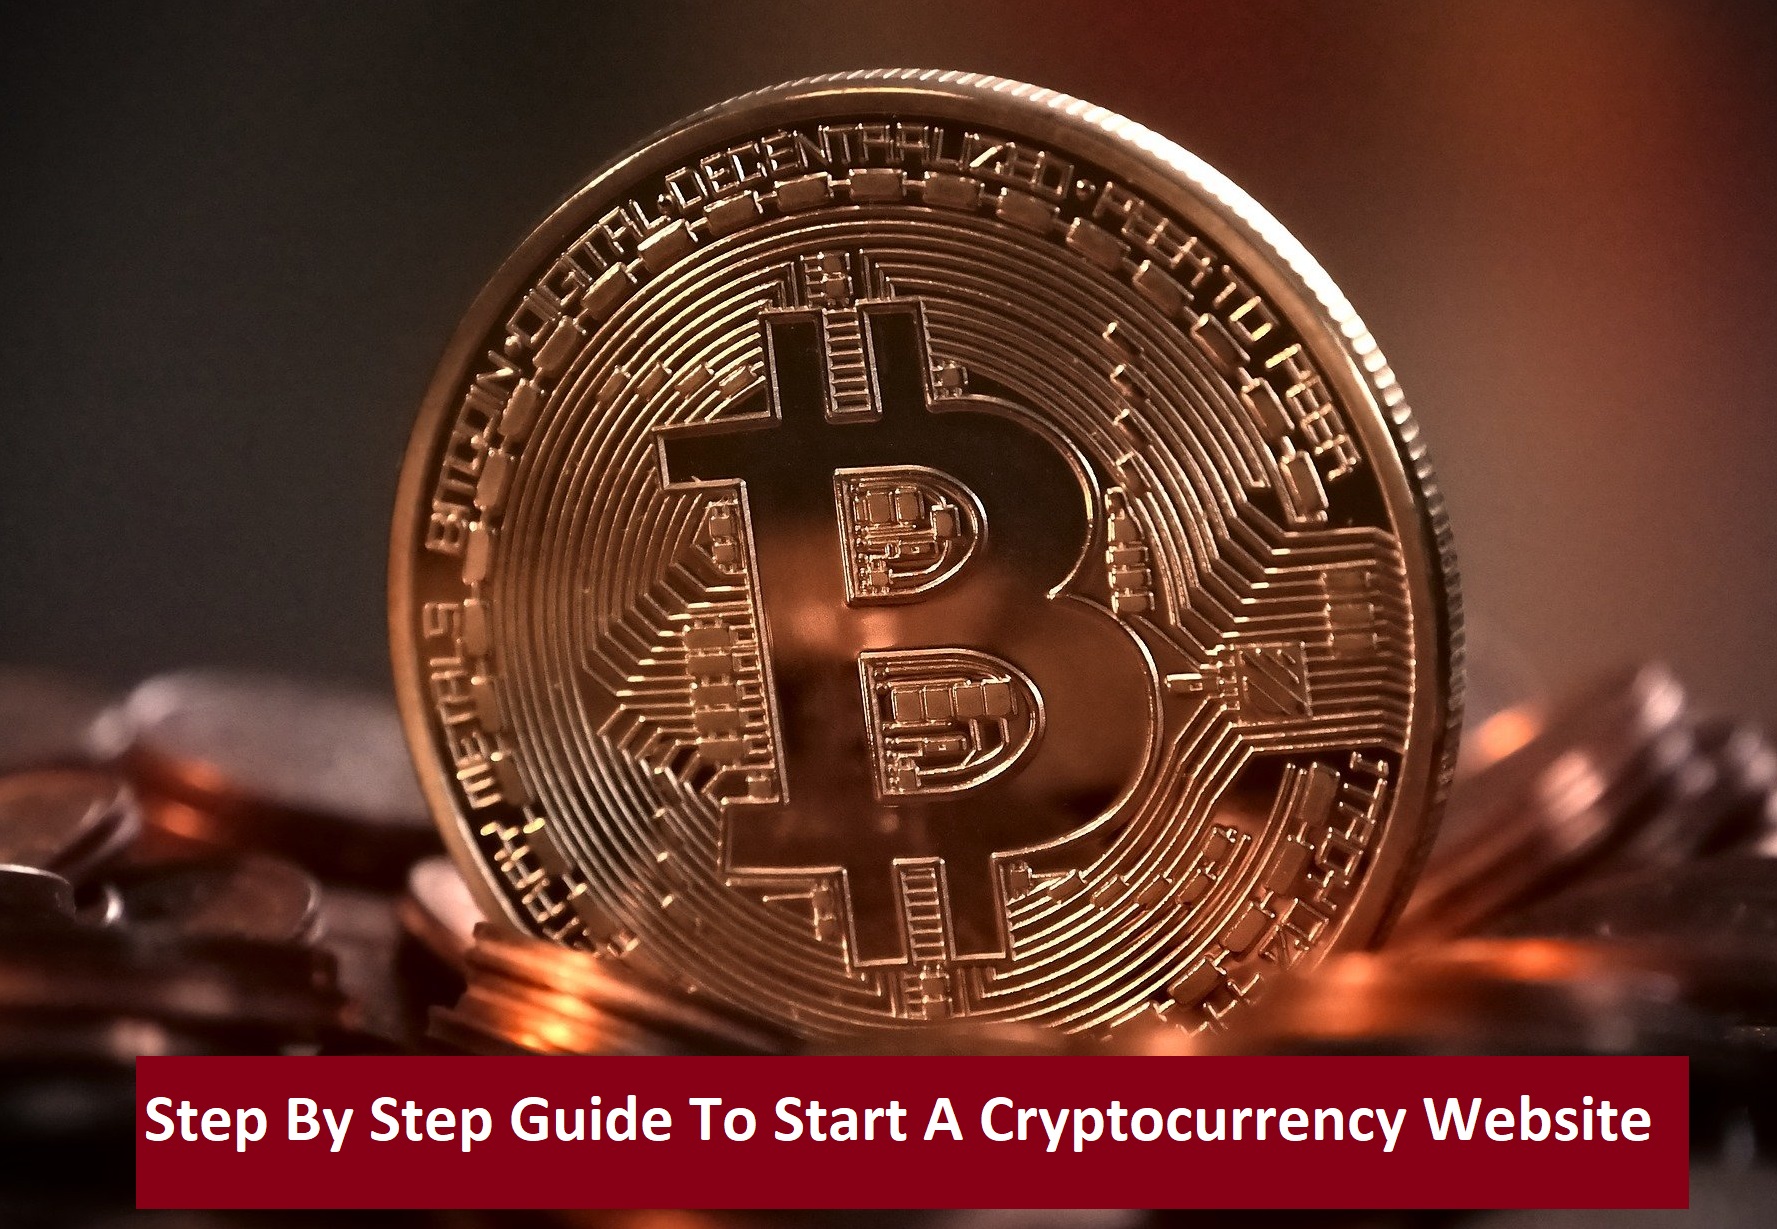 Step By Step Guide To Start A Cryptocurrency Website